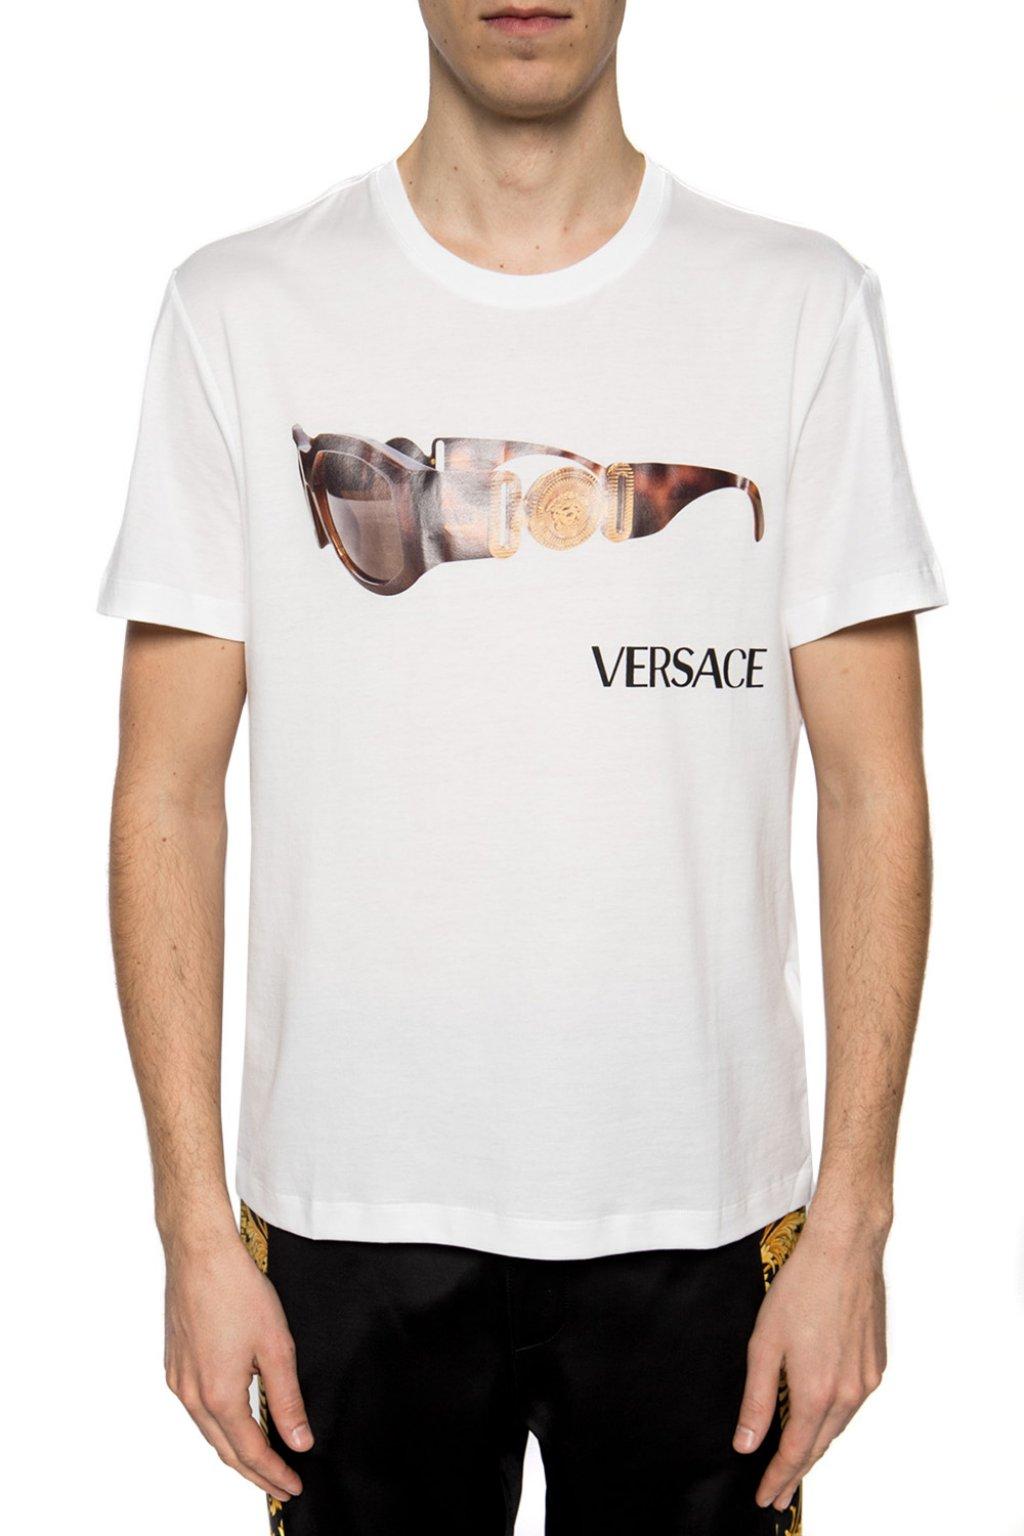 Versace Cotton T-shirt in White for Men - Save 27% - Lyst